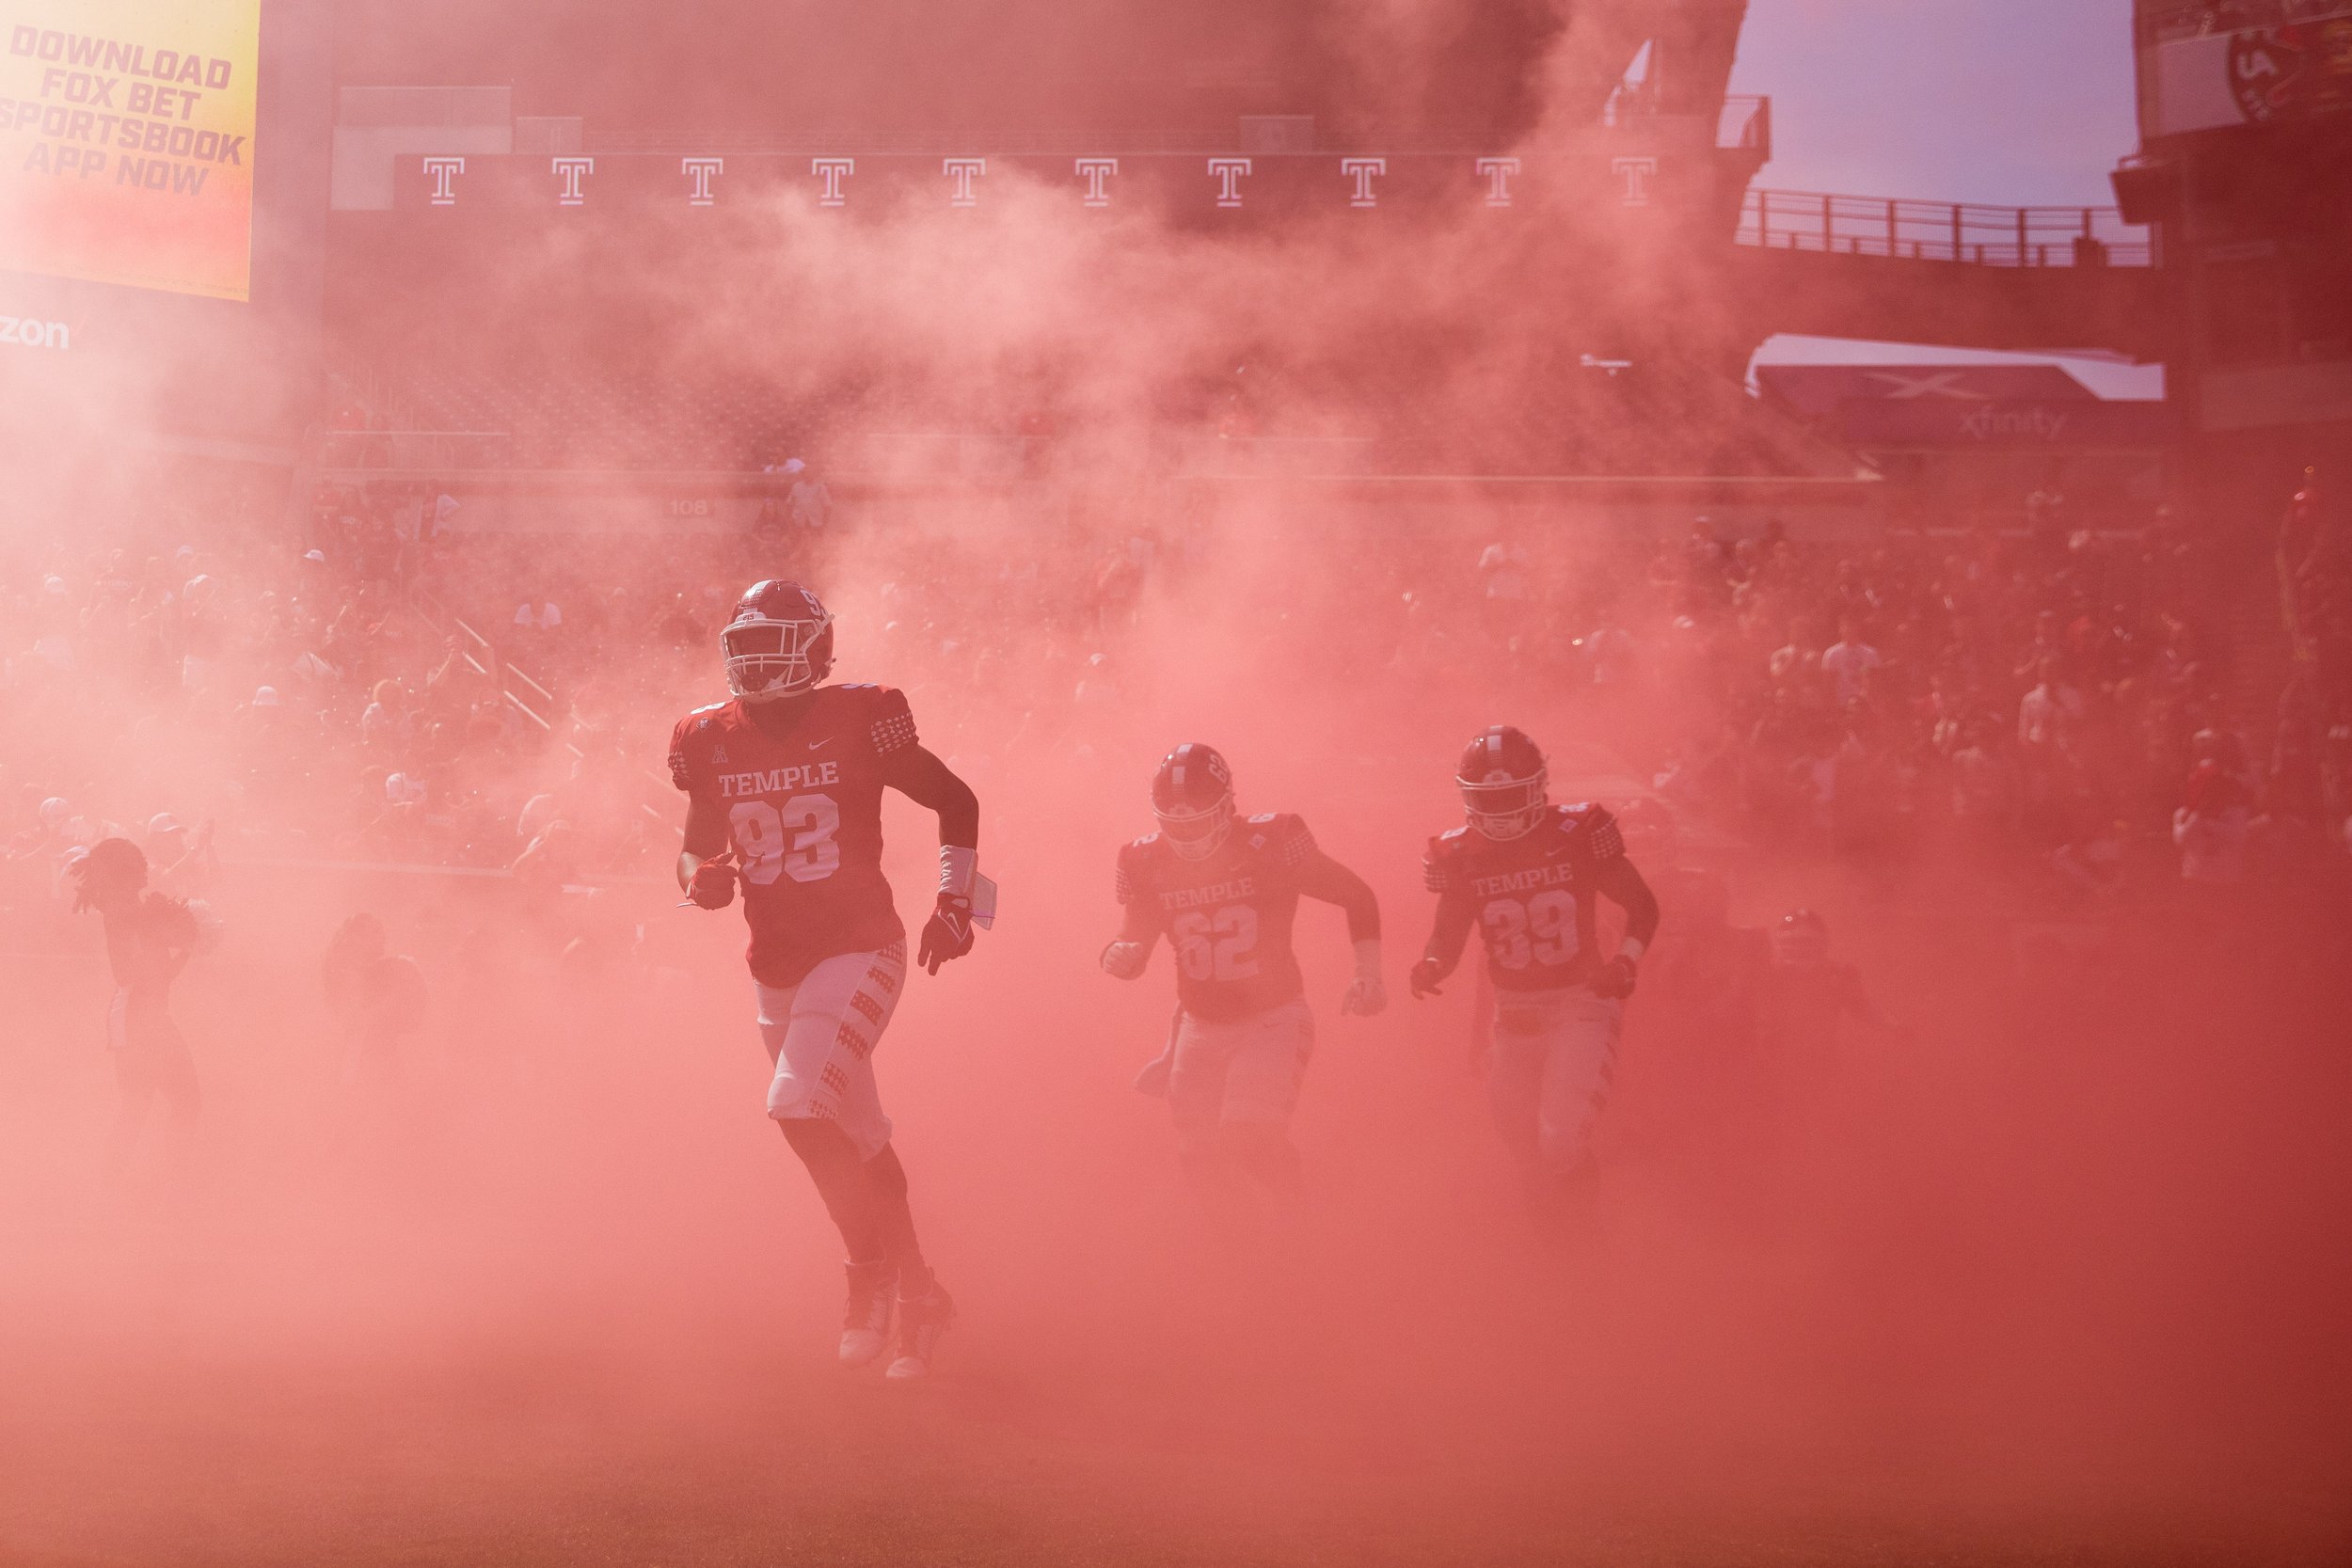   The Temple Owls football team runs out onto the field through red smoke before the start of the homecoming game against the University of Memphis on Oct. 2, 2021.  